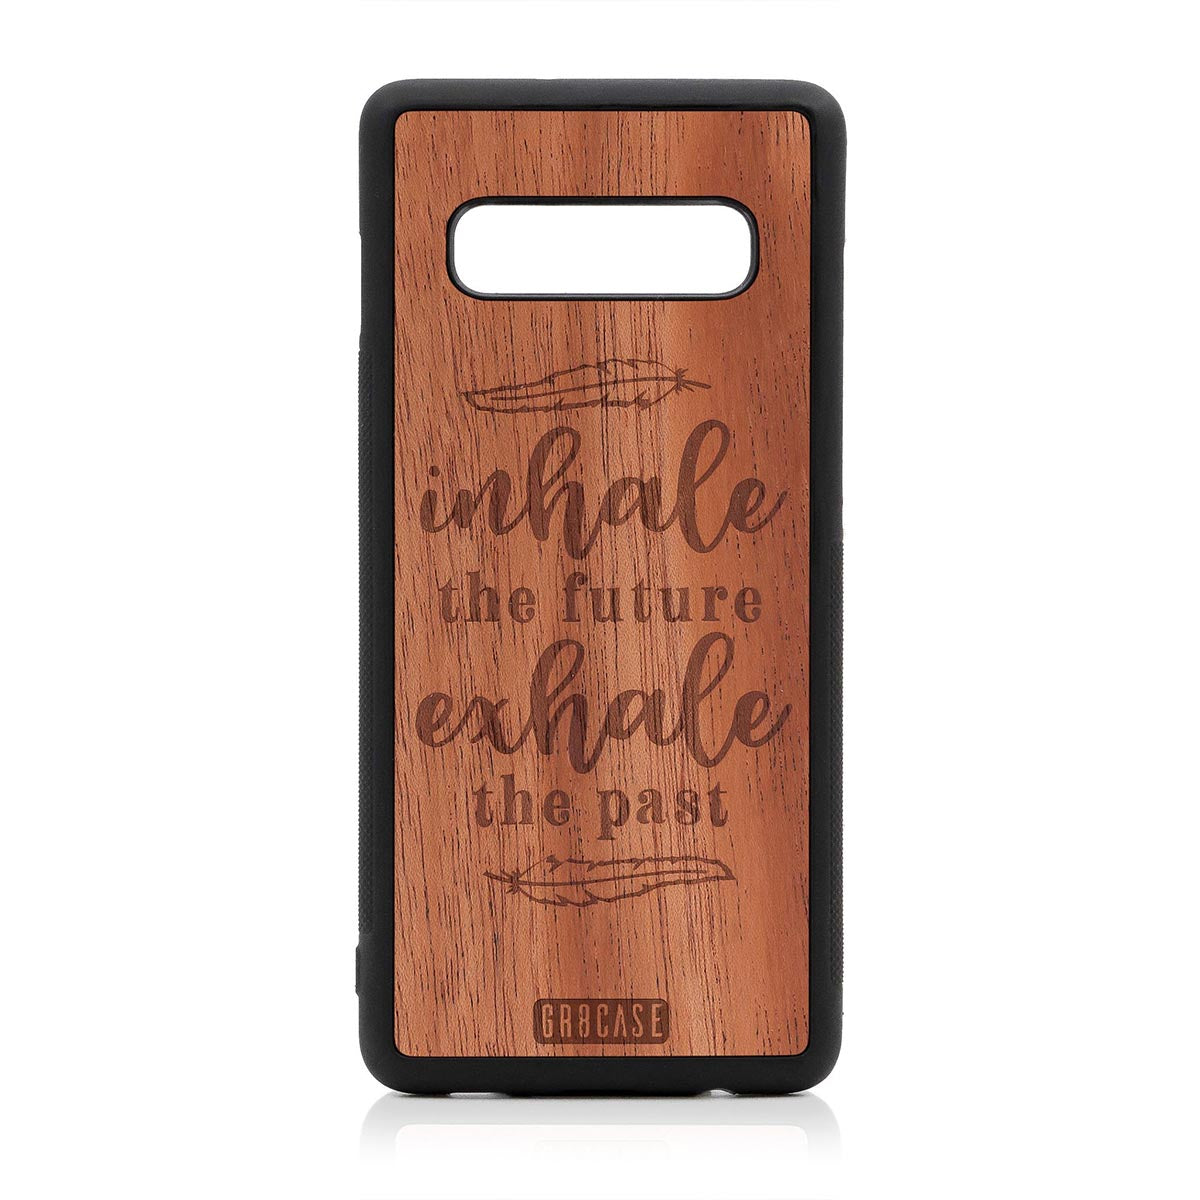 Inhale The Future Exhale The Past Design Wood Case Samsung Galaxy S10 Plus by GR8CASE